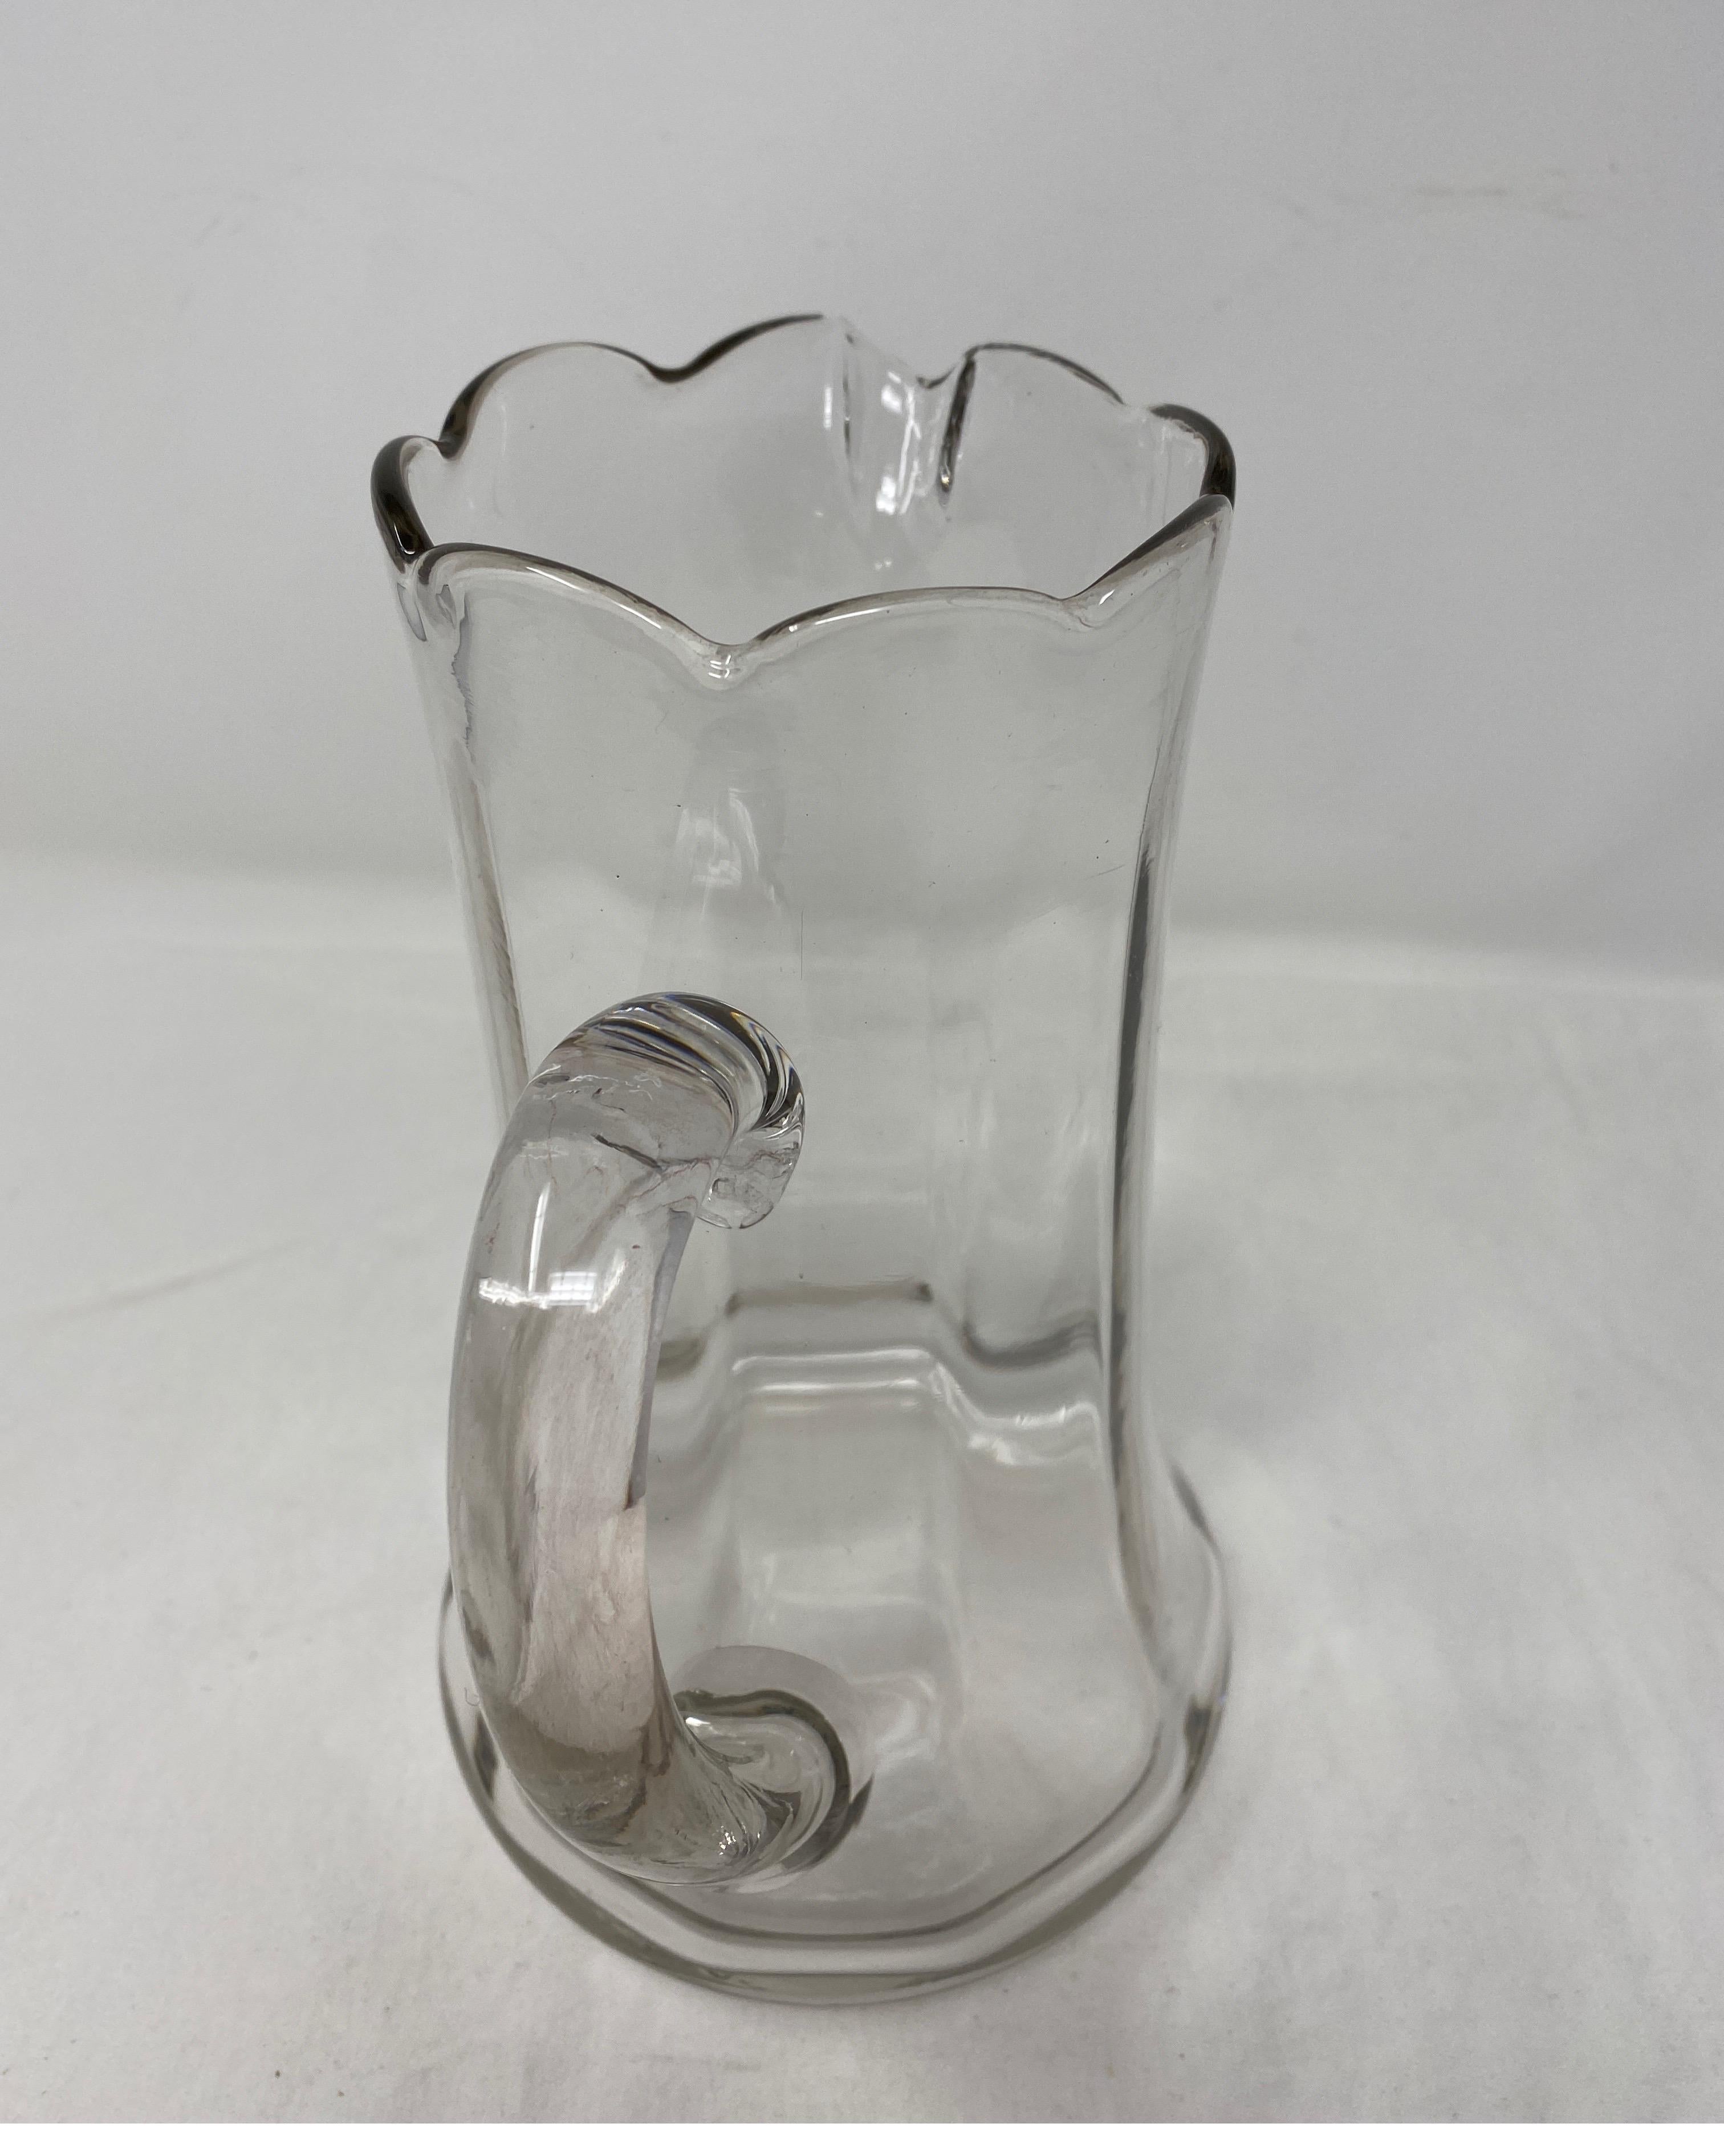 Antique crystal pitcher, 19th century.

7.5